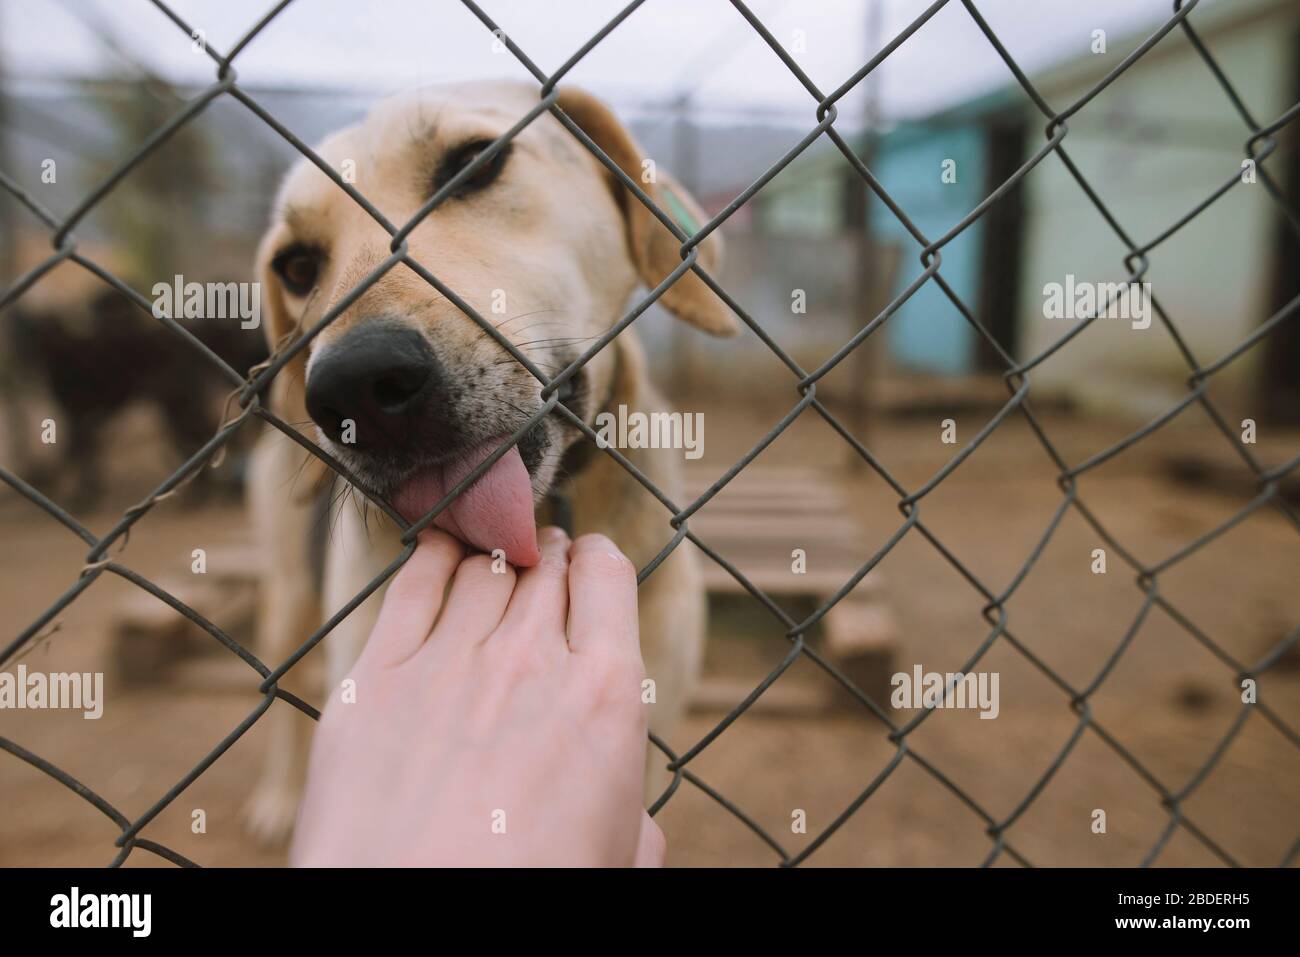 Dog licking human hand through fence in animal shelter Stock Photo